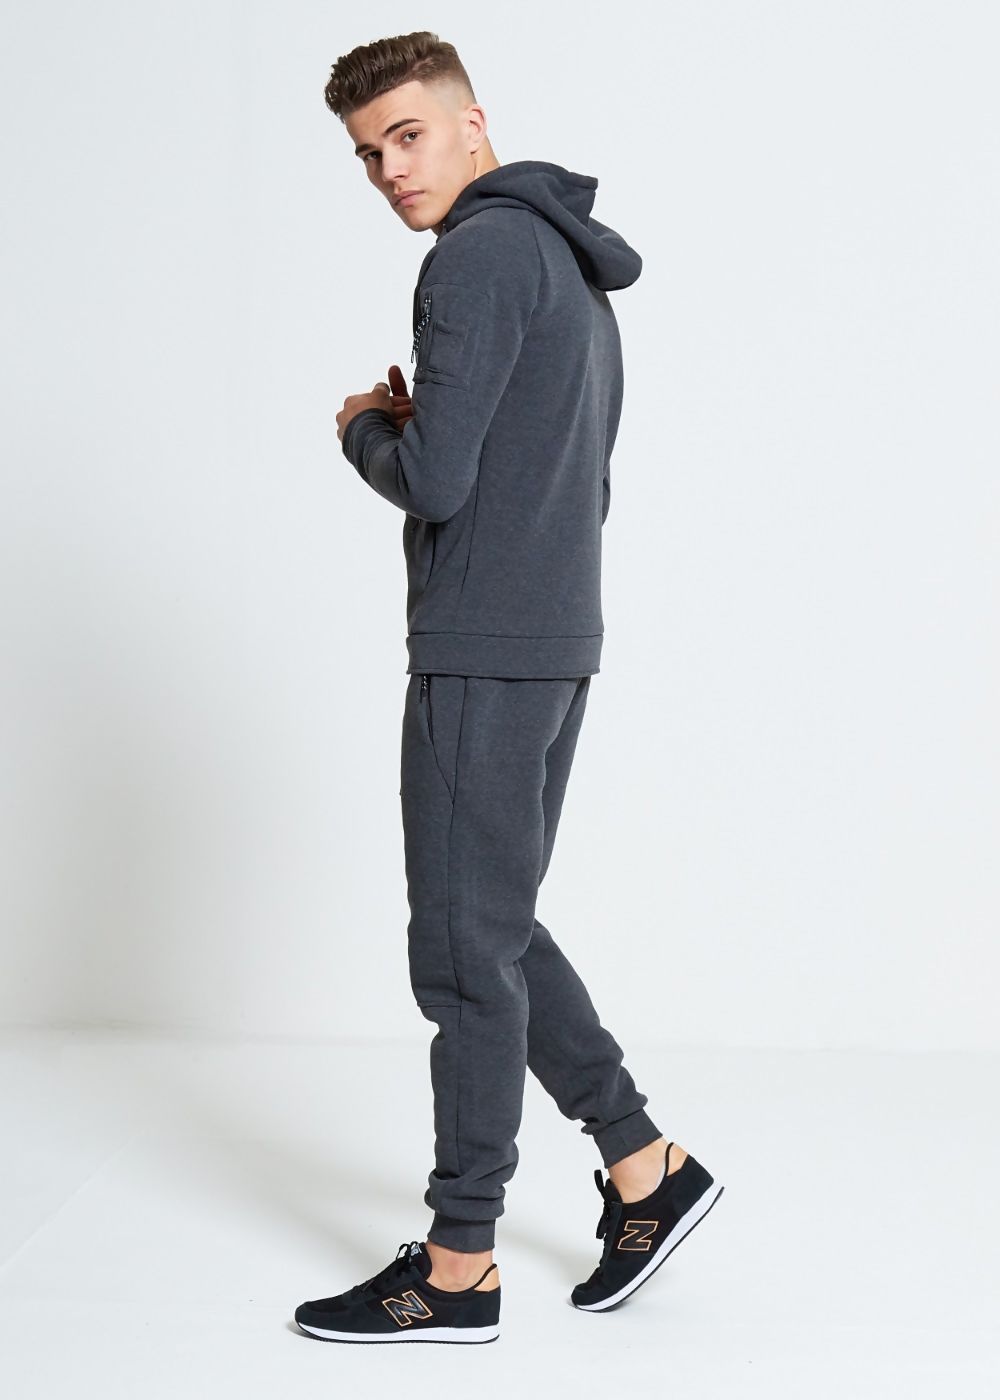 Comfy Charcoal Zip Through Skinny Fit Hooded Tracksuit Set  - ACCEPTING PRE-ORDERS